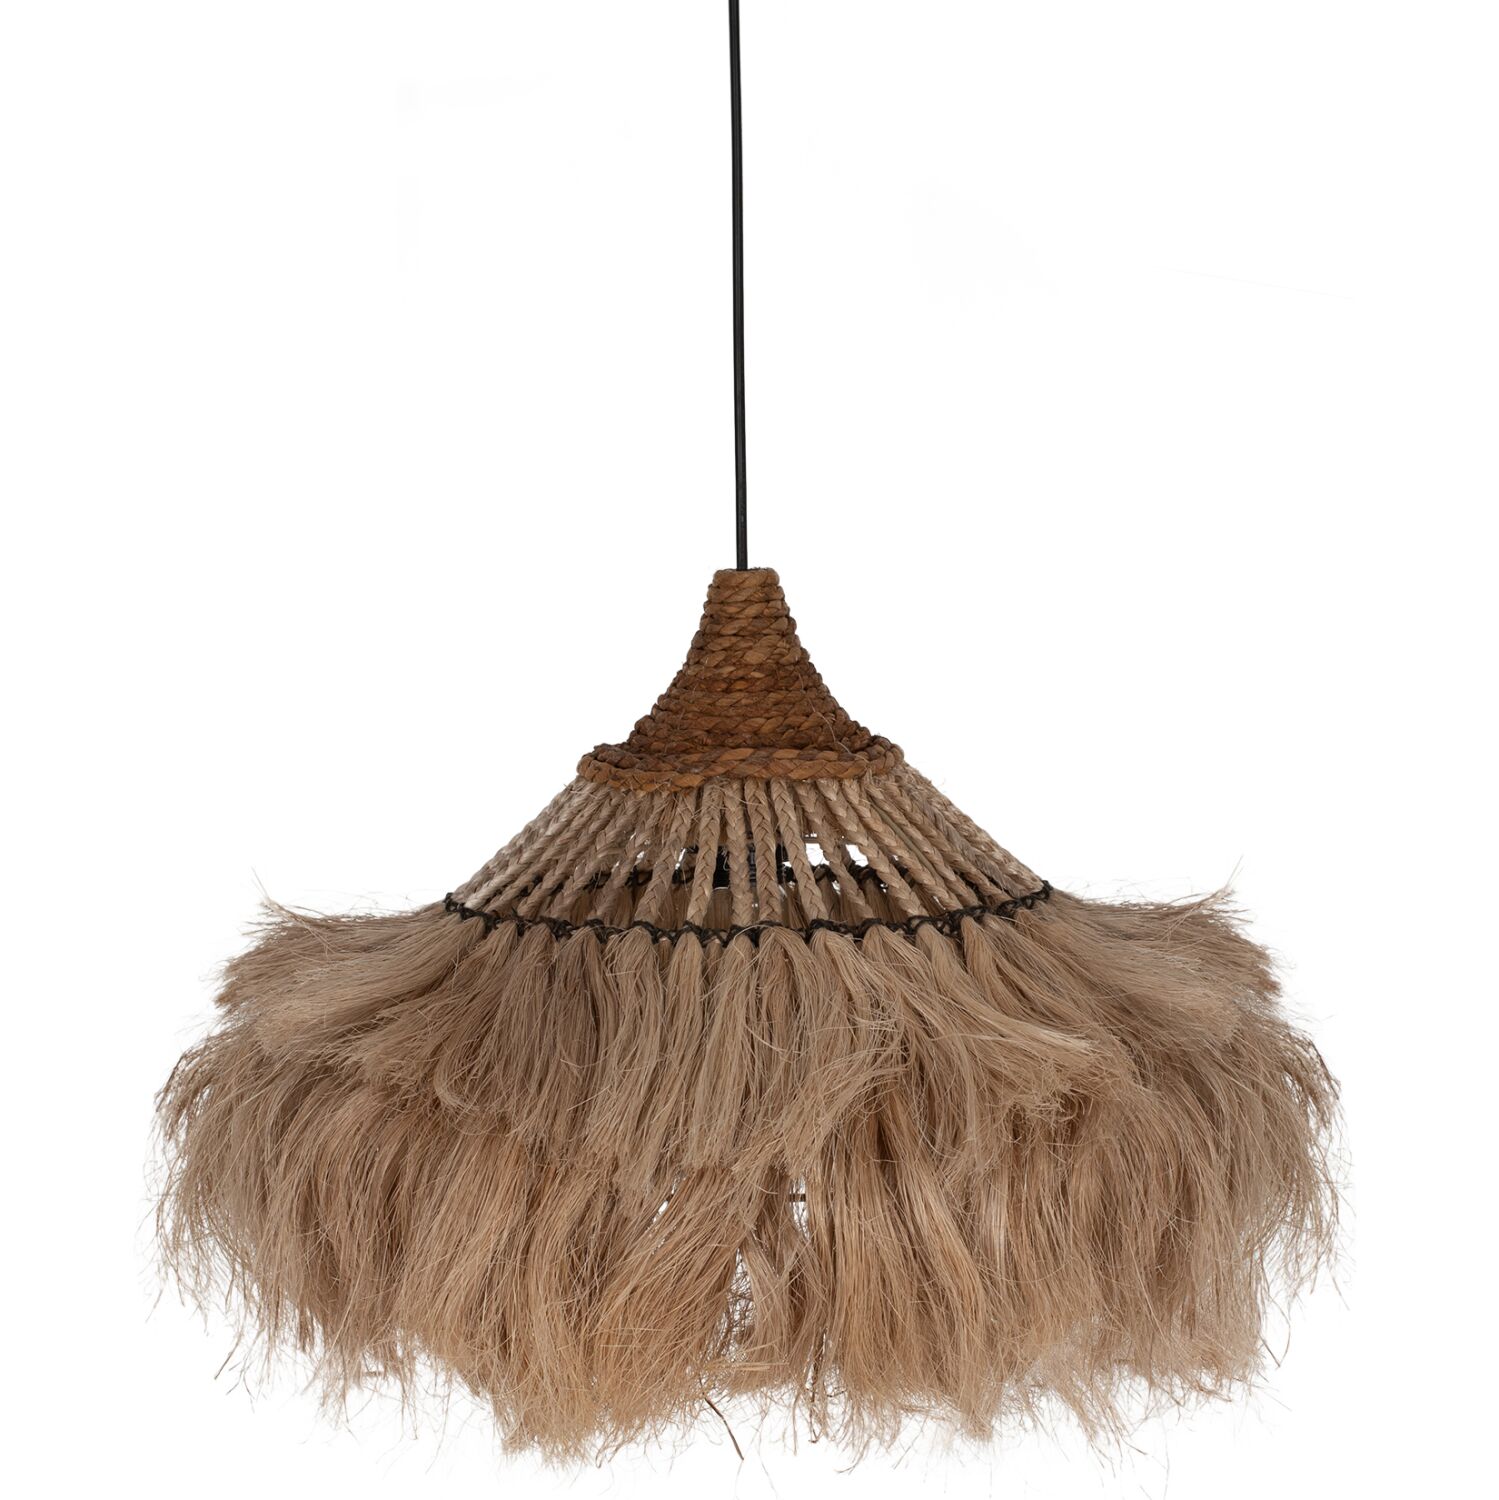 CEILING PENDANT MADE OF ABACA FIBERS IN NATURAL COLOR 40x40x40-80Hcm.HM7806